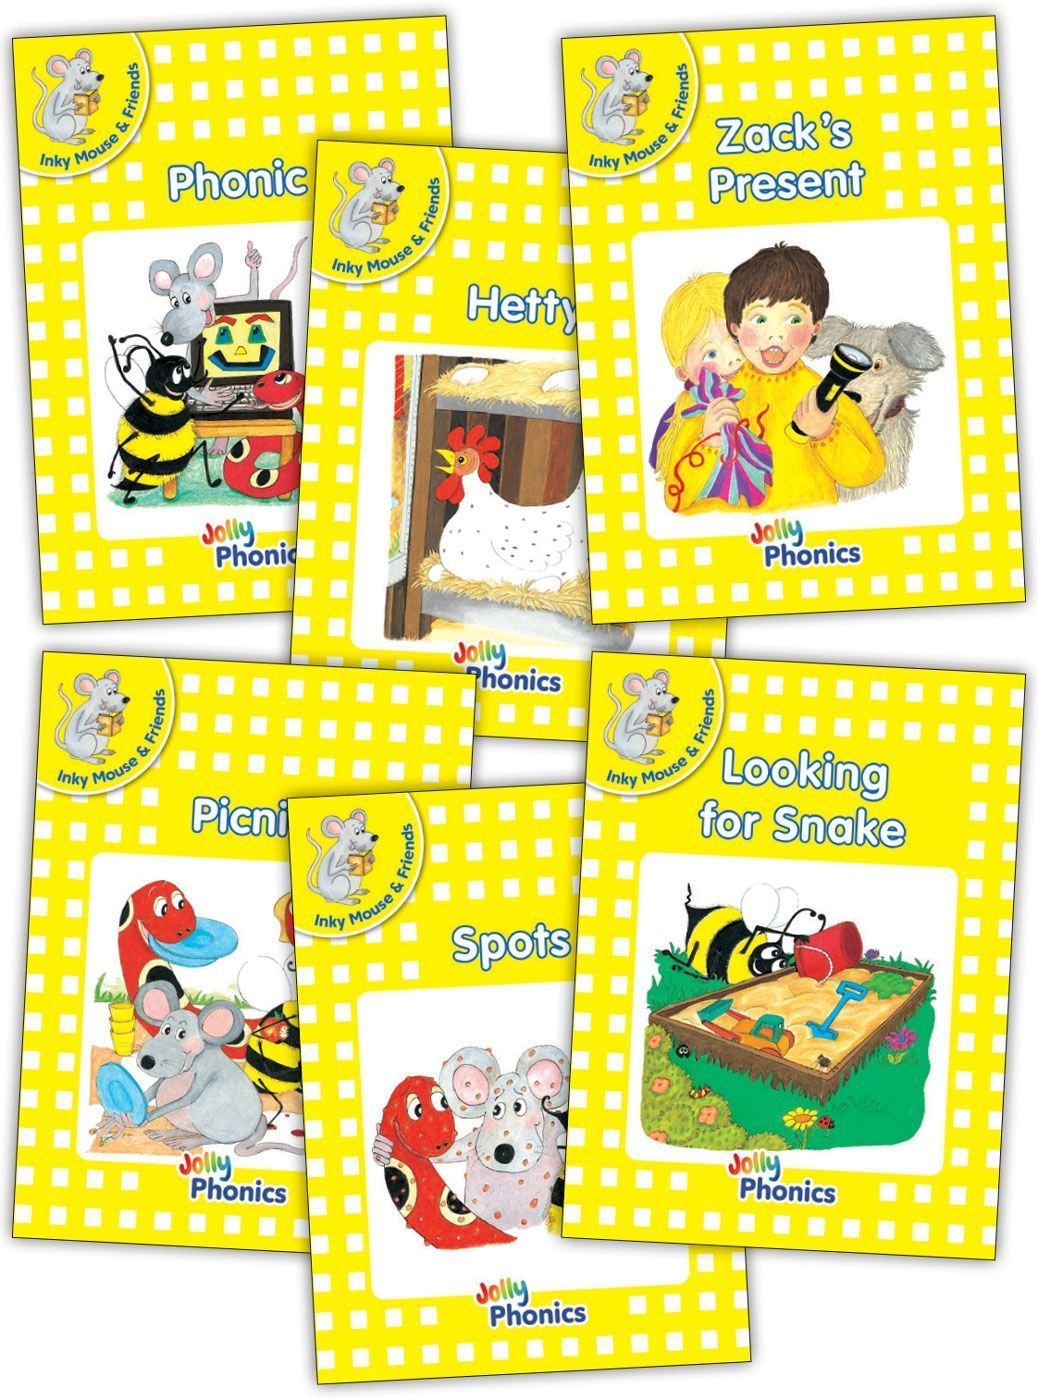 Free　Level　Delivery　Inky　Buy　Wernham　Readers,　Jolly　With　by　Phonics　Friends,　Sara